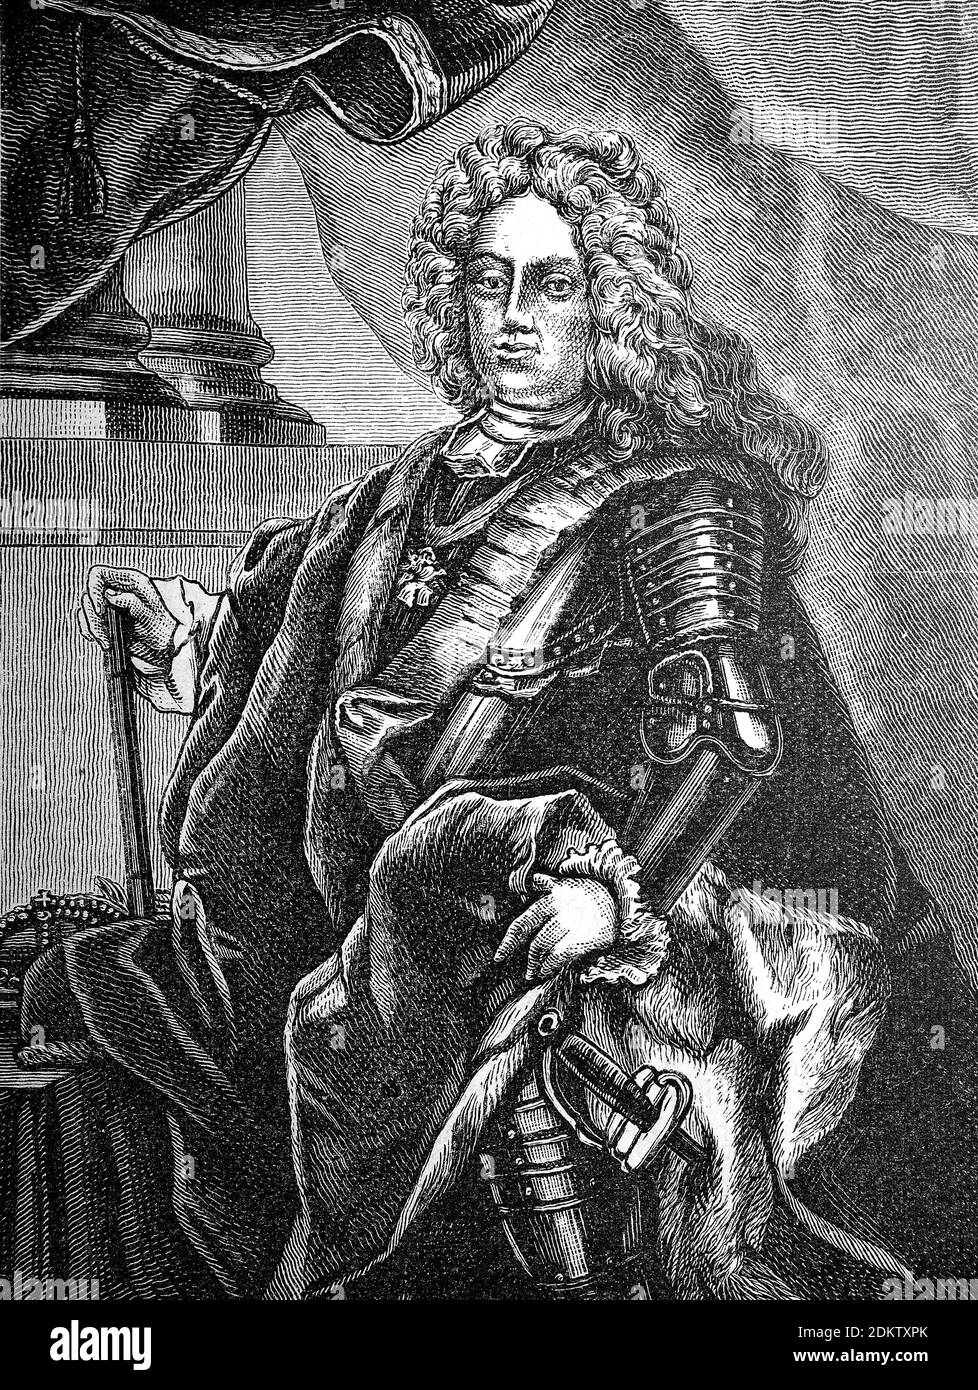 Frederick August I of Saxony, May 12, 1670 - February 1, 1733, from April 27, 1694 to February 1, 1733 as Frederick August I Elector and Duke of Saxony and from September 15, 1697 to 1706 and again from 1709 to February 1, 1733 in personal union as August II. King of Poland  /  Friedrich August I. von Sachsen, 12. Mai 1670 - 1. Februar 1733, von 27. April 1694 bis 1. Februar 1733 als Friedrich August I. Kurfürst und Herzog von Sachsen sowie von 15. September 1697 bis 1706 und neuerlich von 1709 bis 1. Februar 1733 in Personalunion als August II. König von Polen, Historisch, historical, digital Stock Photo